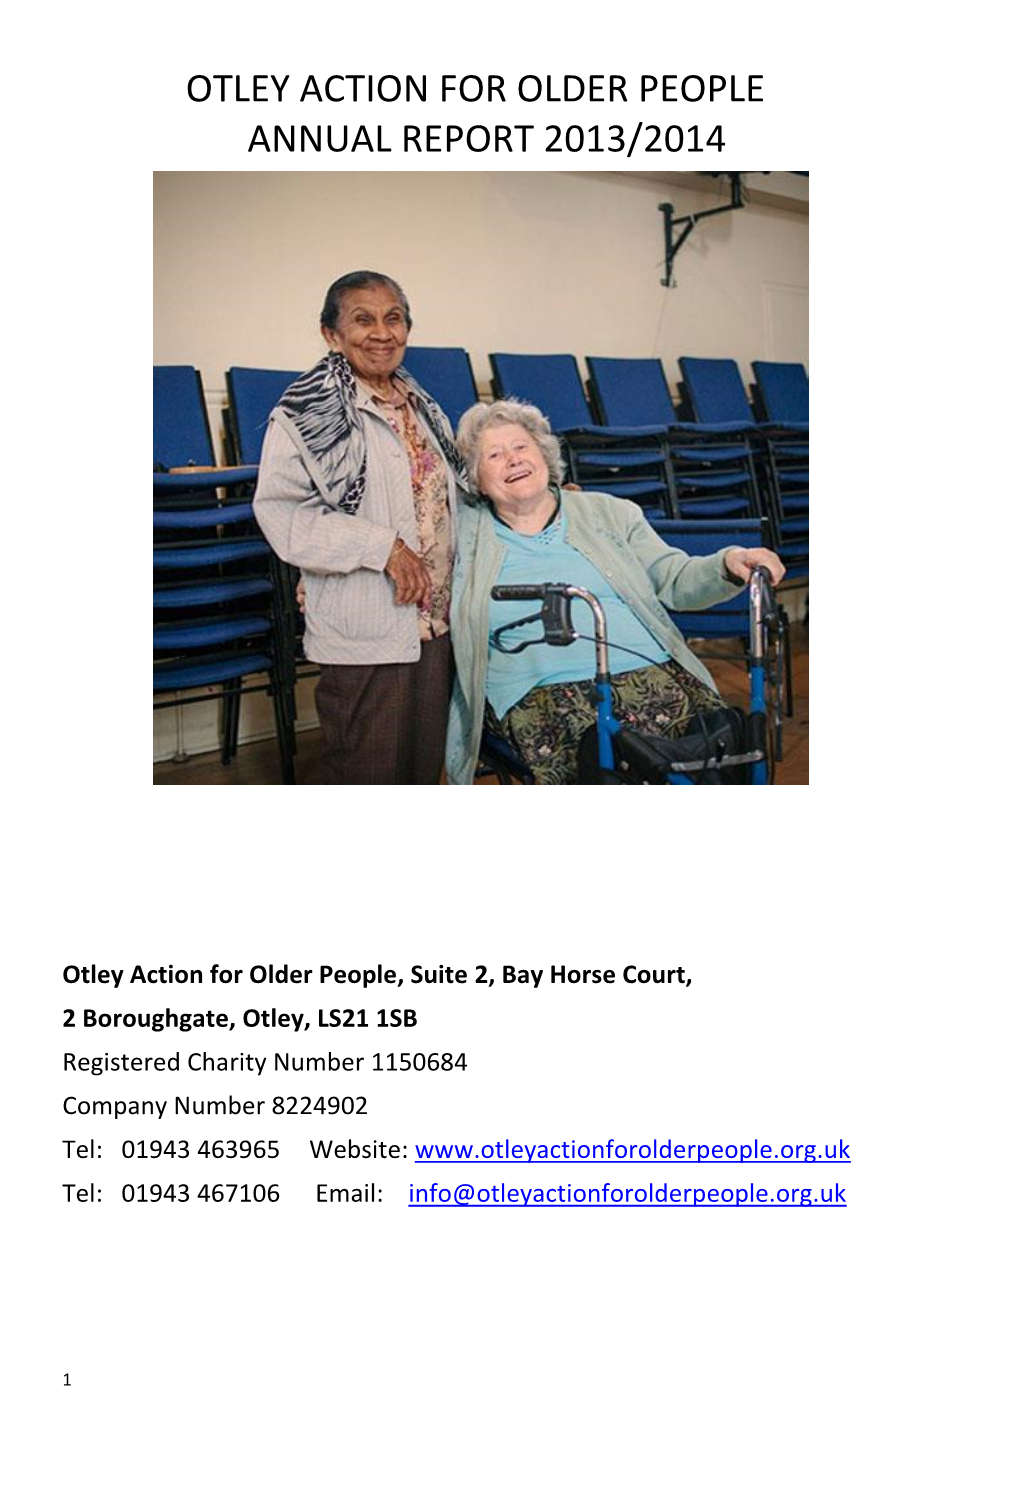 Otley Action for Older People Annual Report 2013/2014